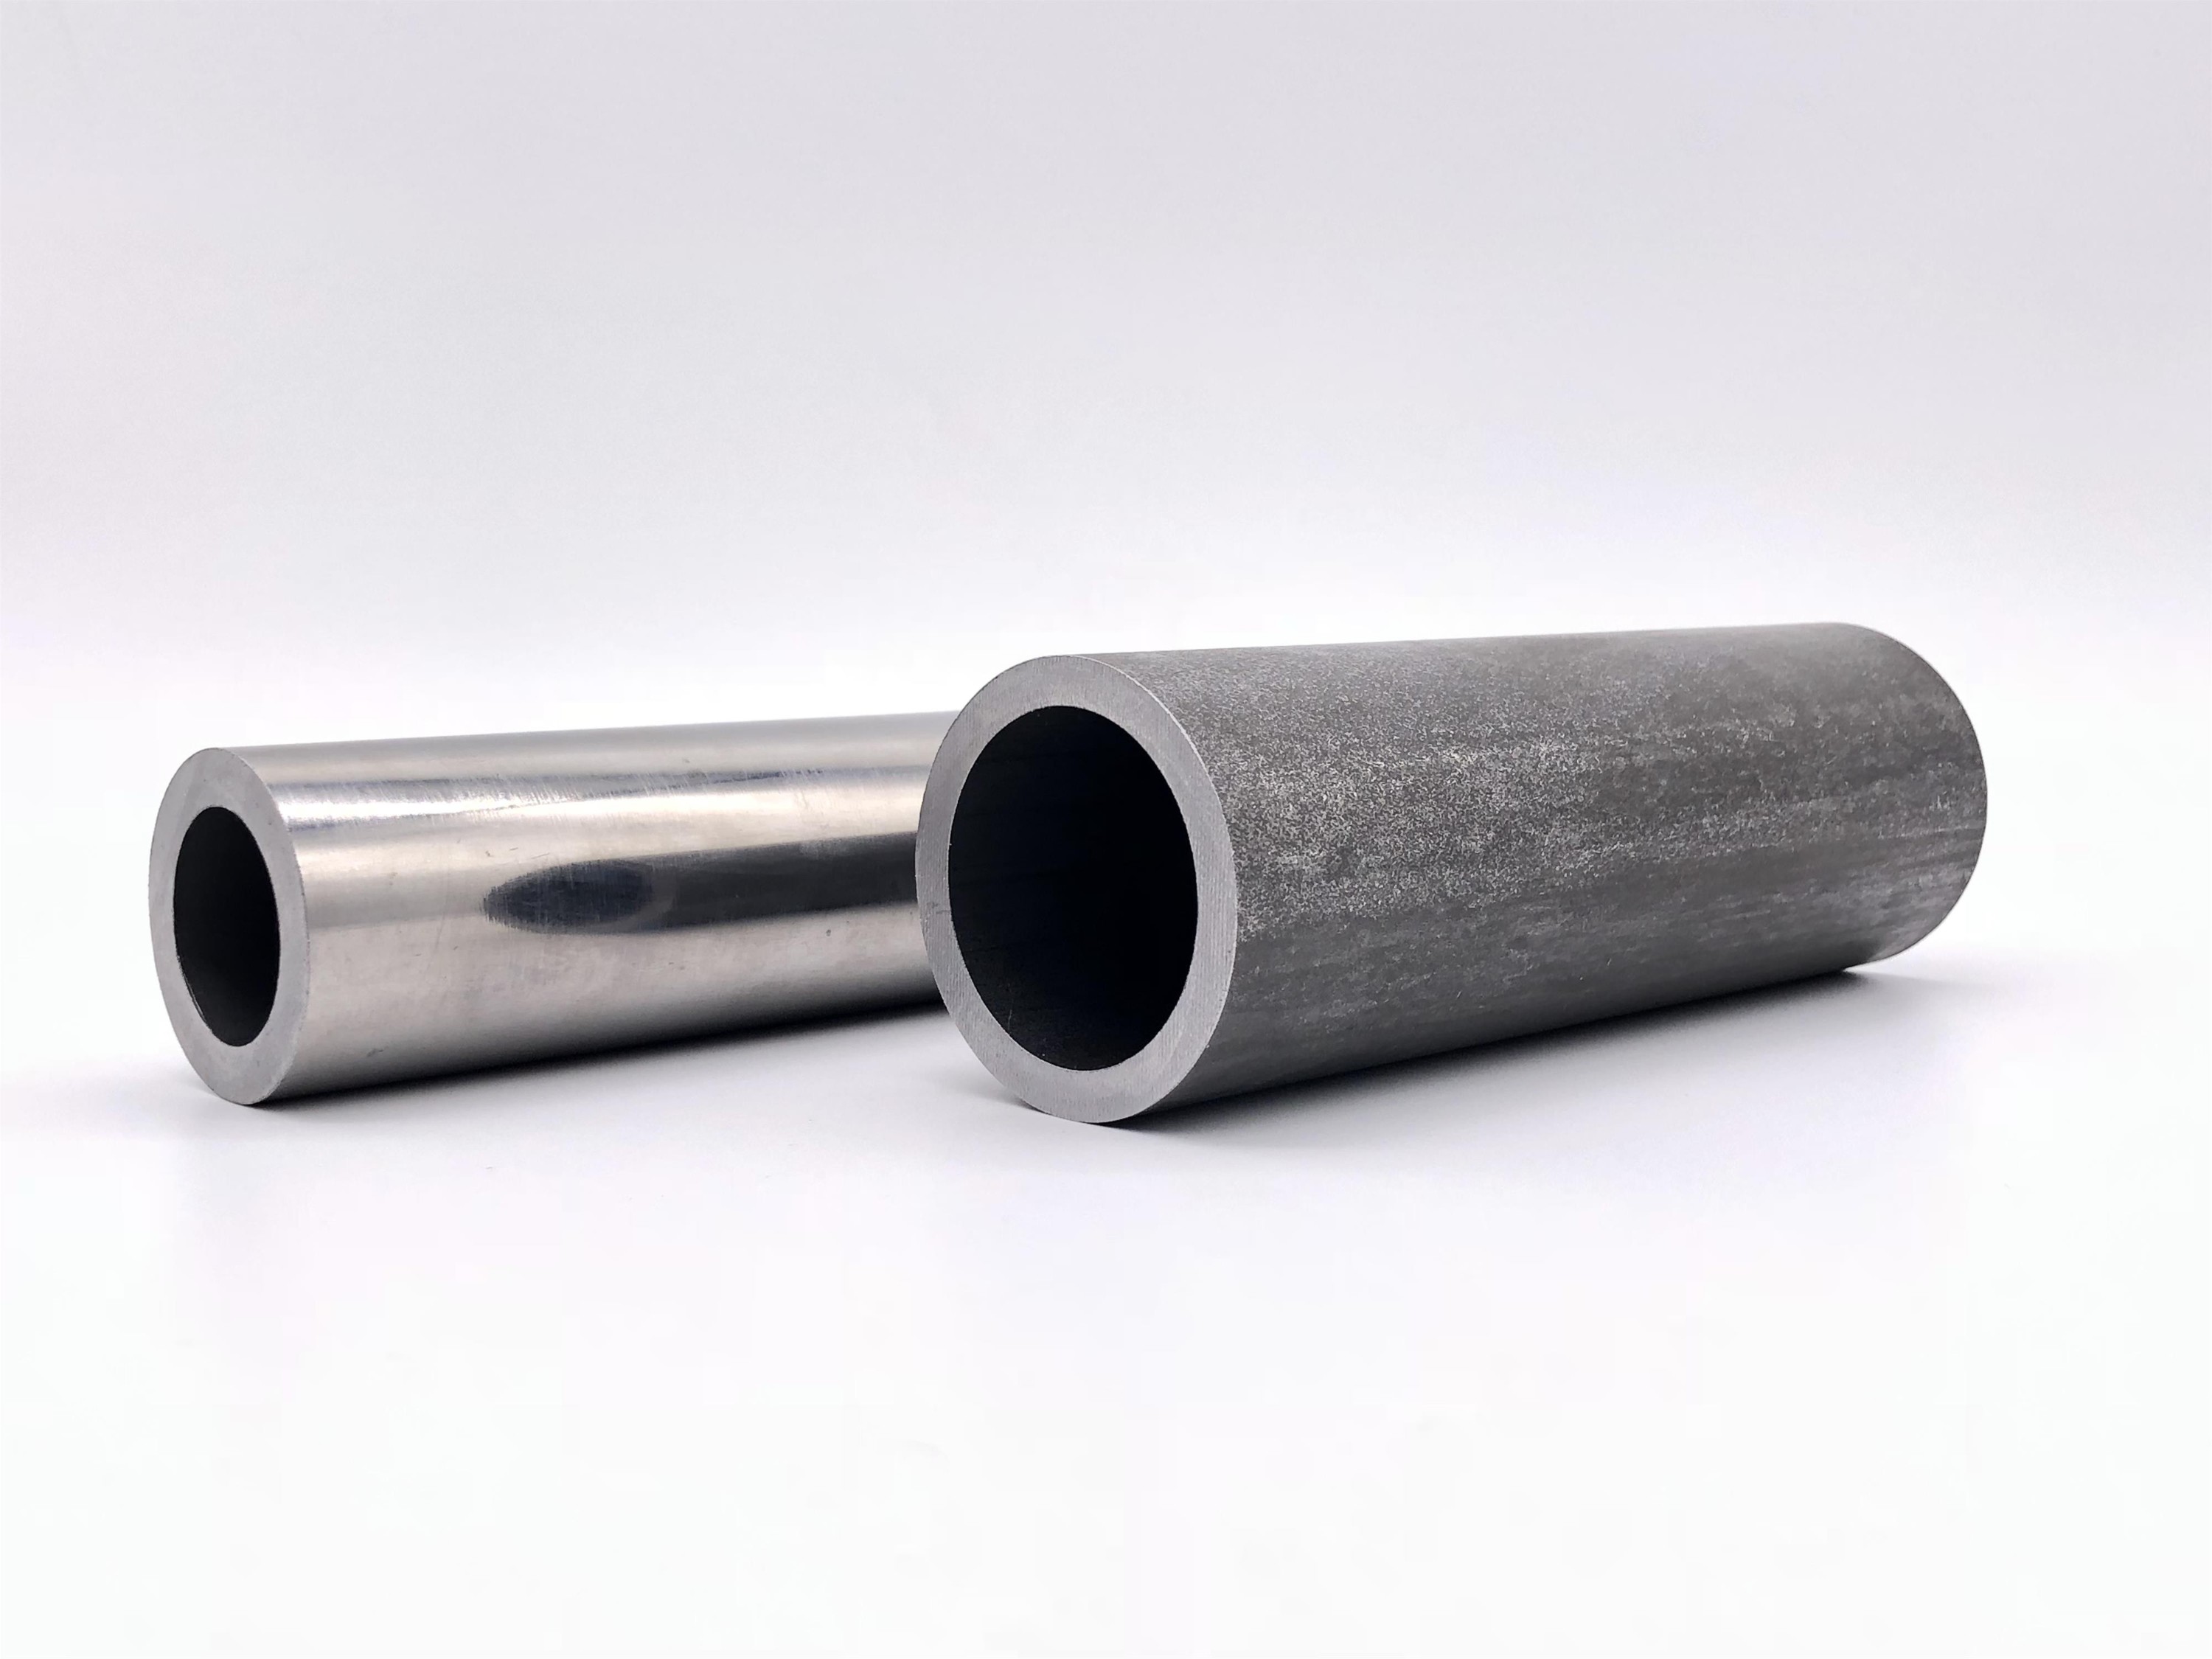 What are the factors that influence the straightness of seamless steel tube?